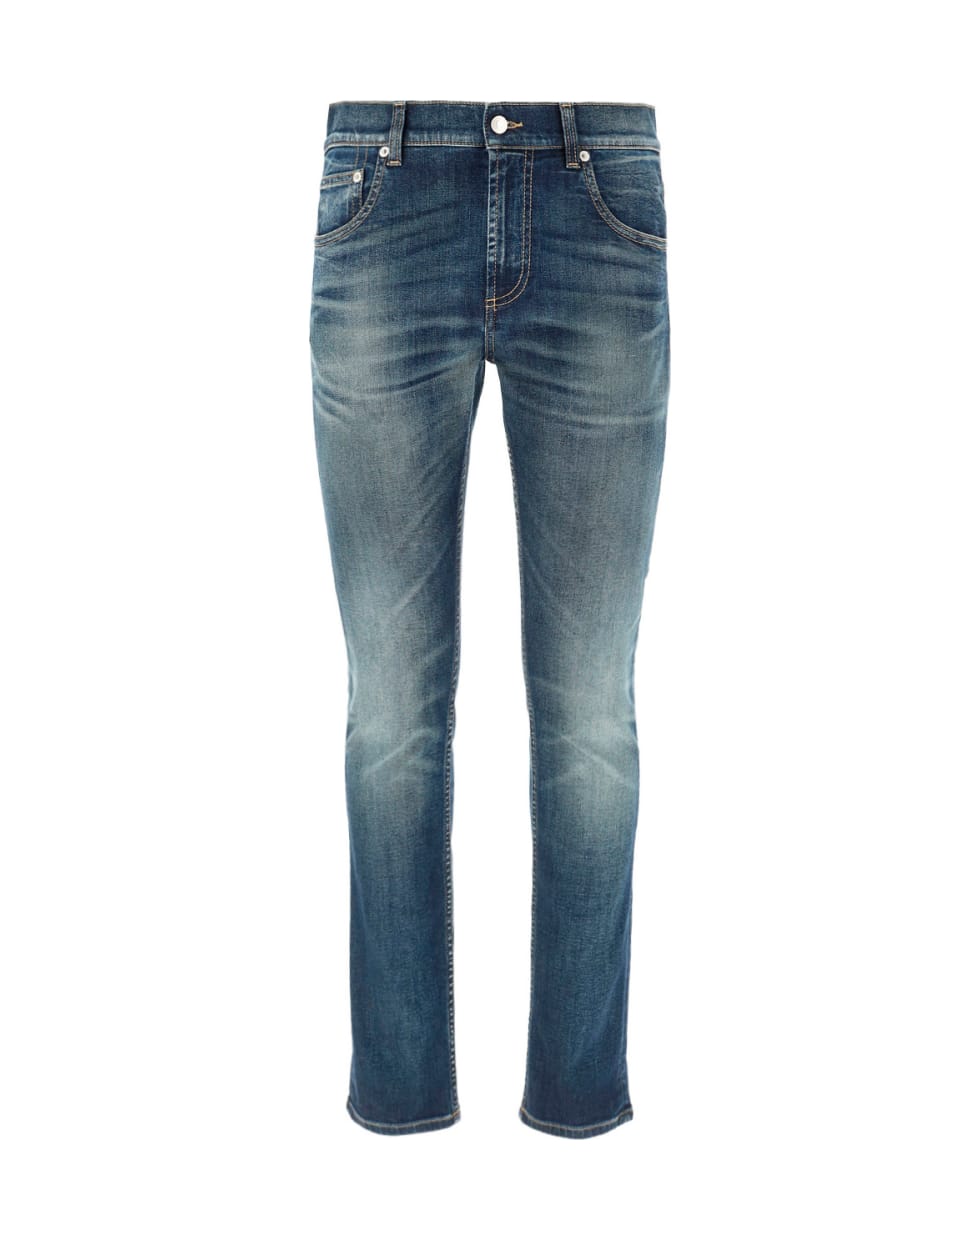 Alexander McQueen Jeans - Blue washed